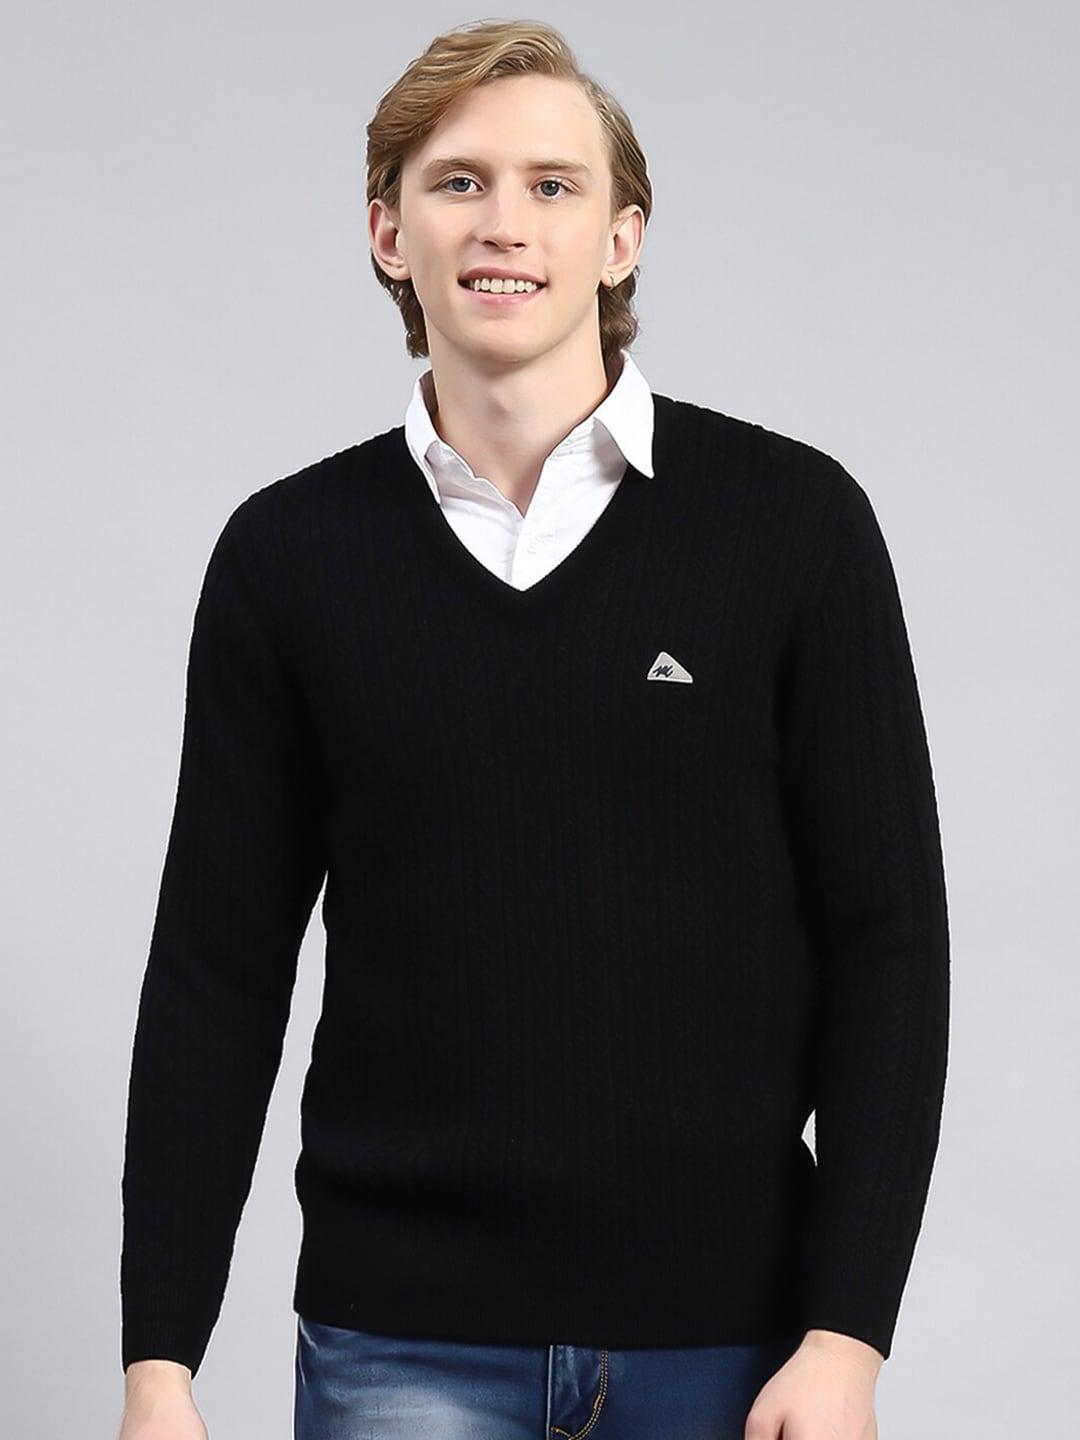 monte-carlo-v-neck-long-sleeves-woolen-pullover